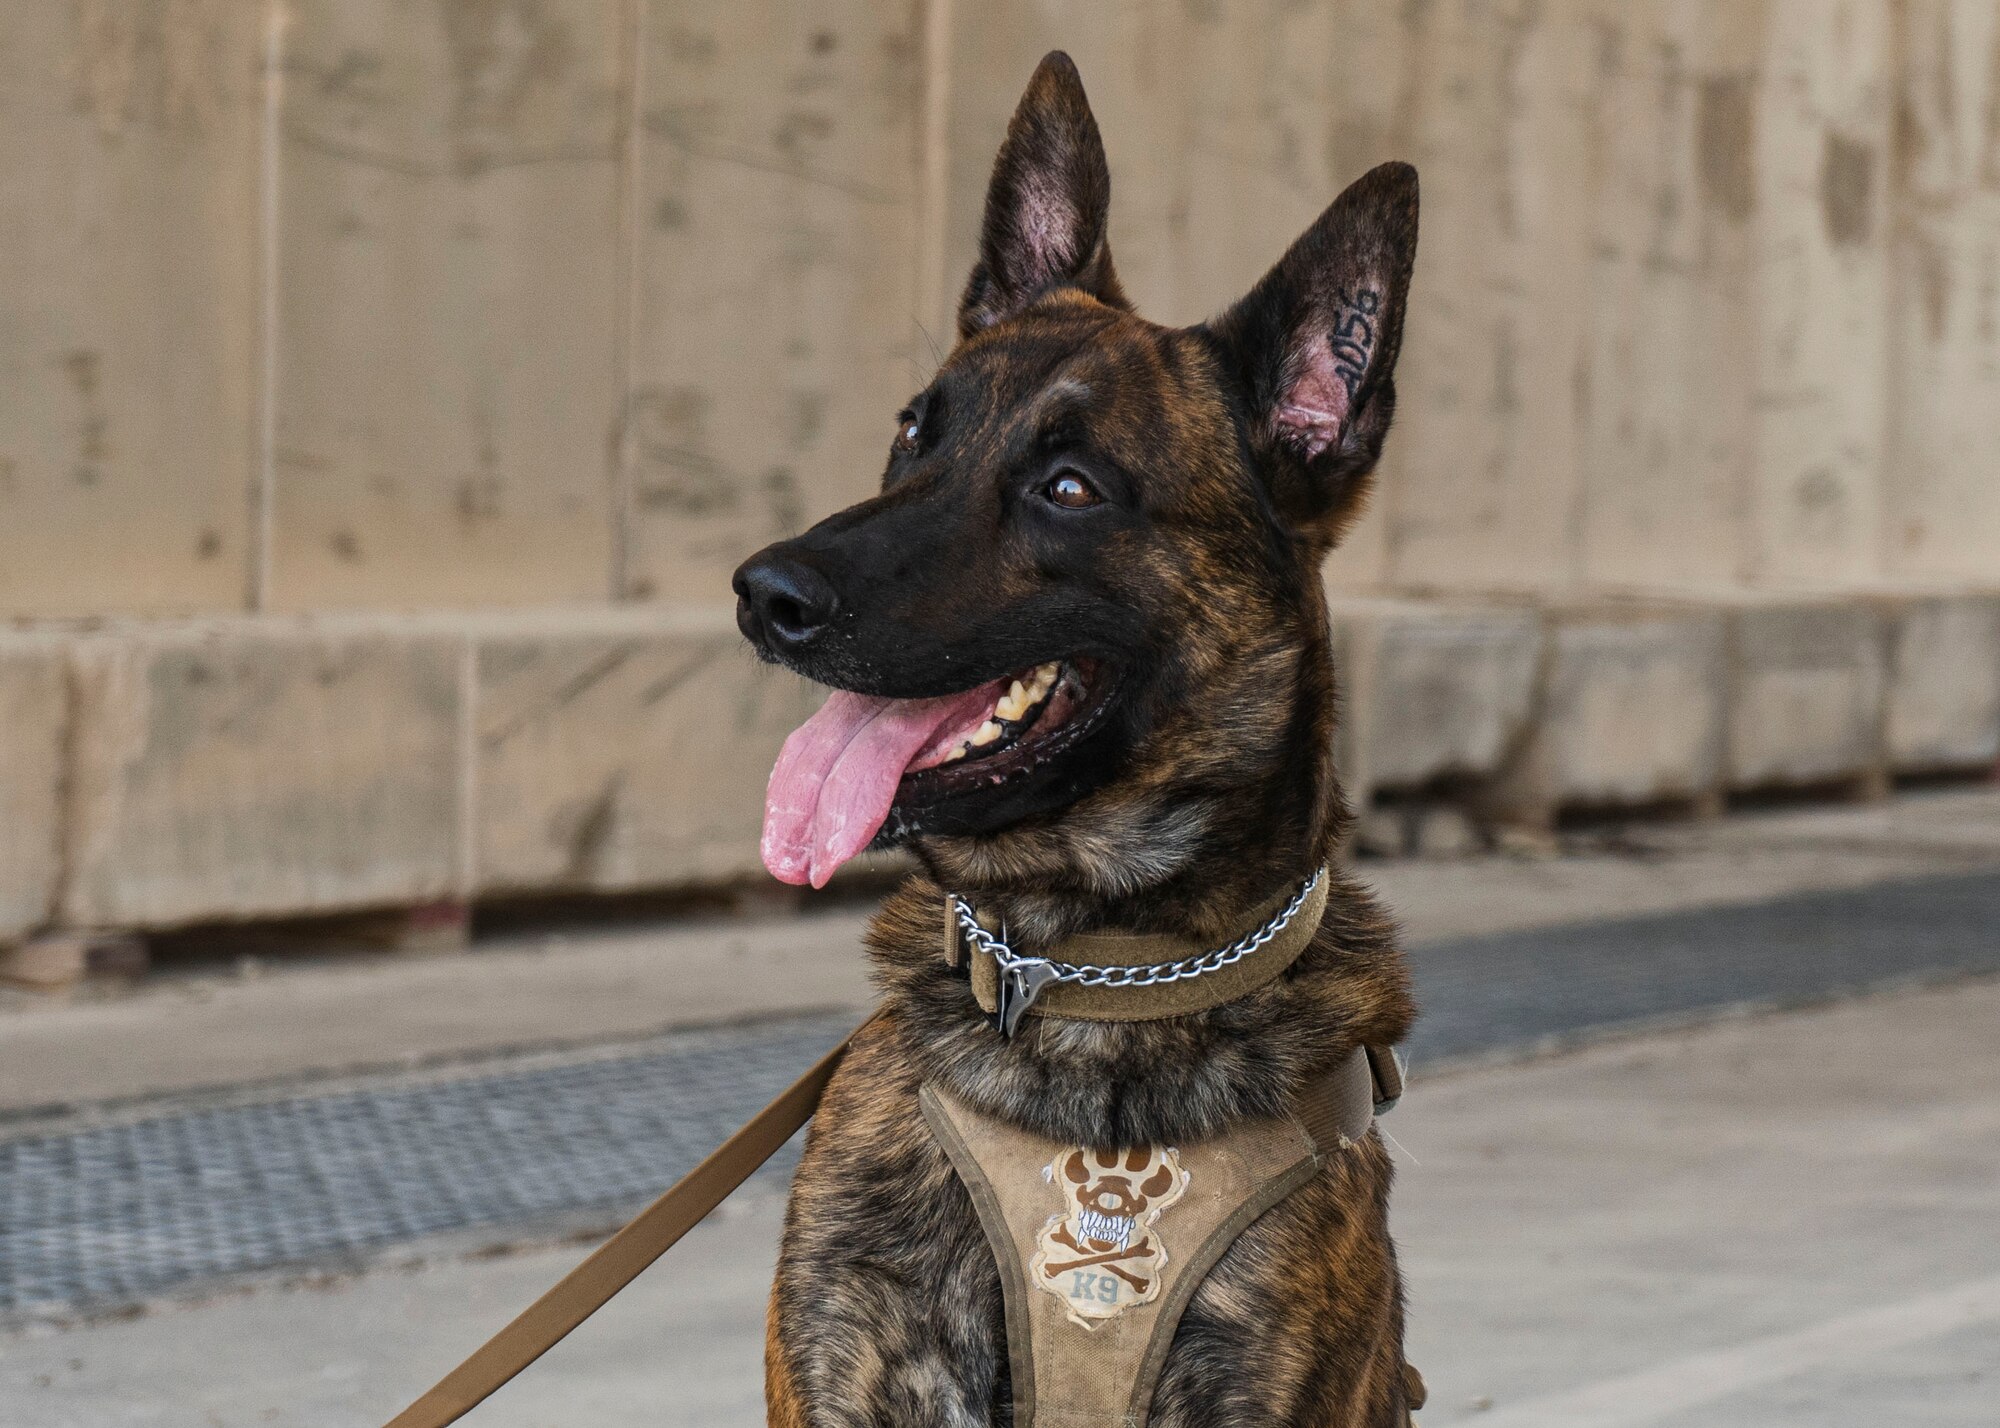 AAslan, 379th Expeditionary Security Forces Squadron military working dog, awaits a command from his handler at Al Udeid Air Base, Qatar, July 2, 2020. MWDs are trained to only listen to commands from their handlers. (U.S. Air Force photo by Senior Airman Olivia Grooms)